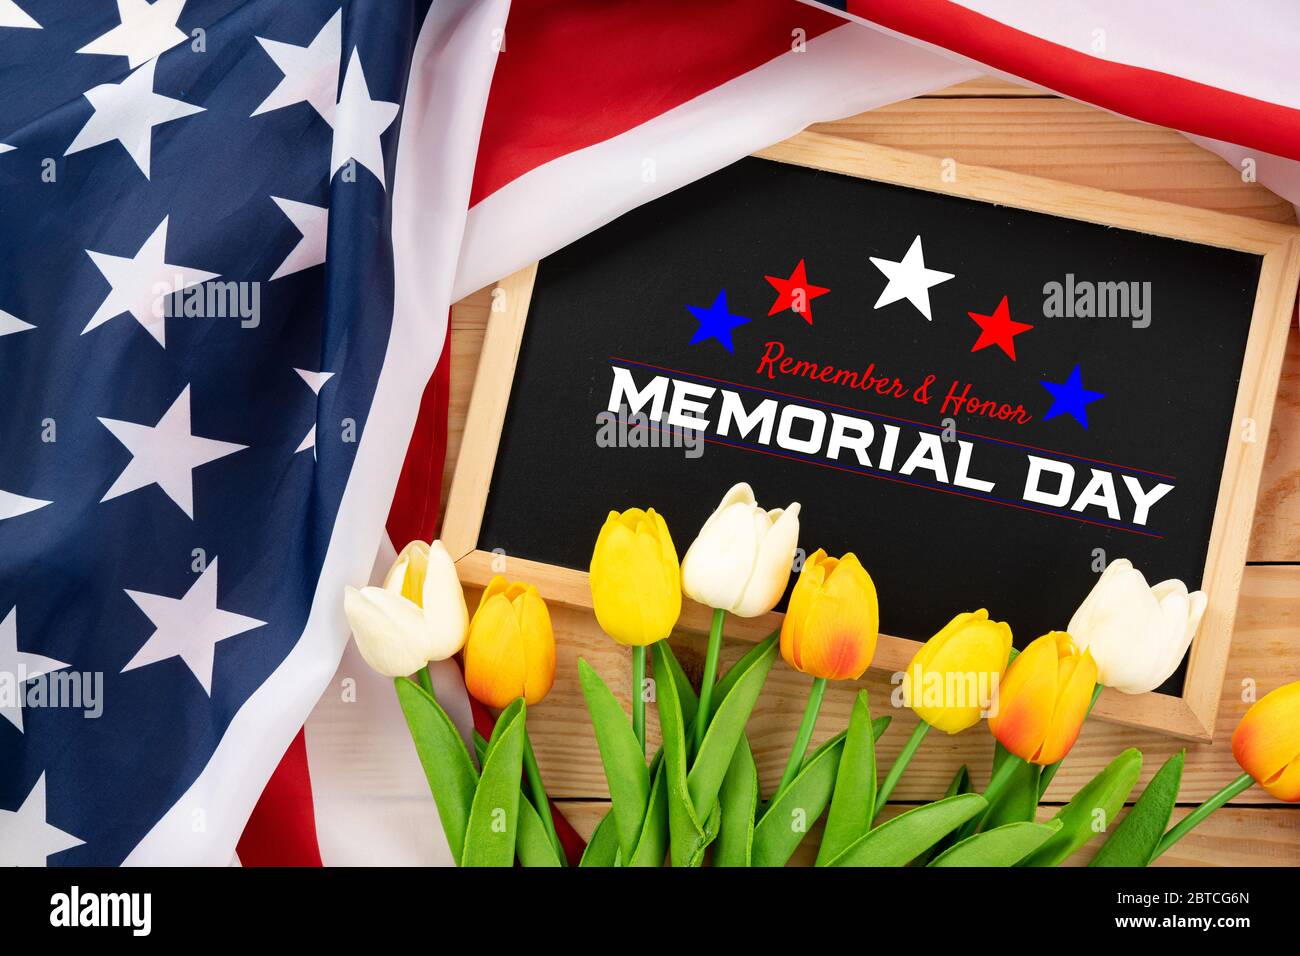 US American flag with blackboard and tulip on wooden background. For USA Memorial day. Top view with memorial day text. Stock Photo